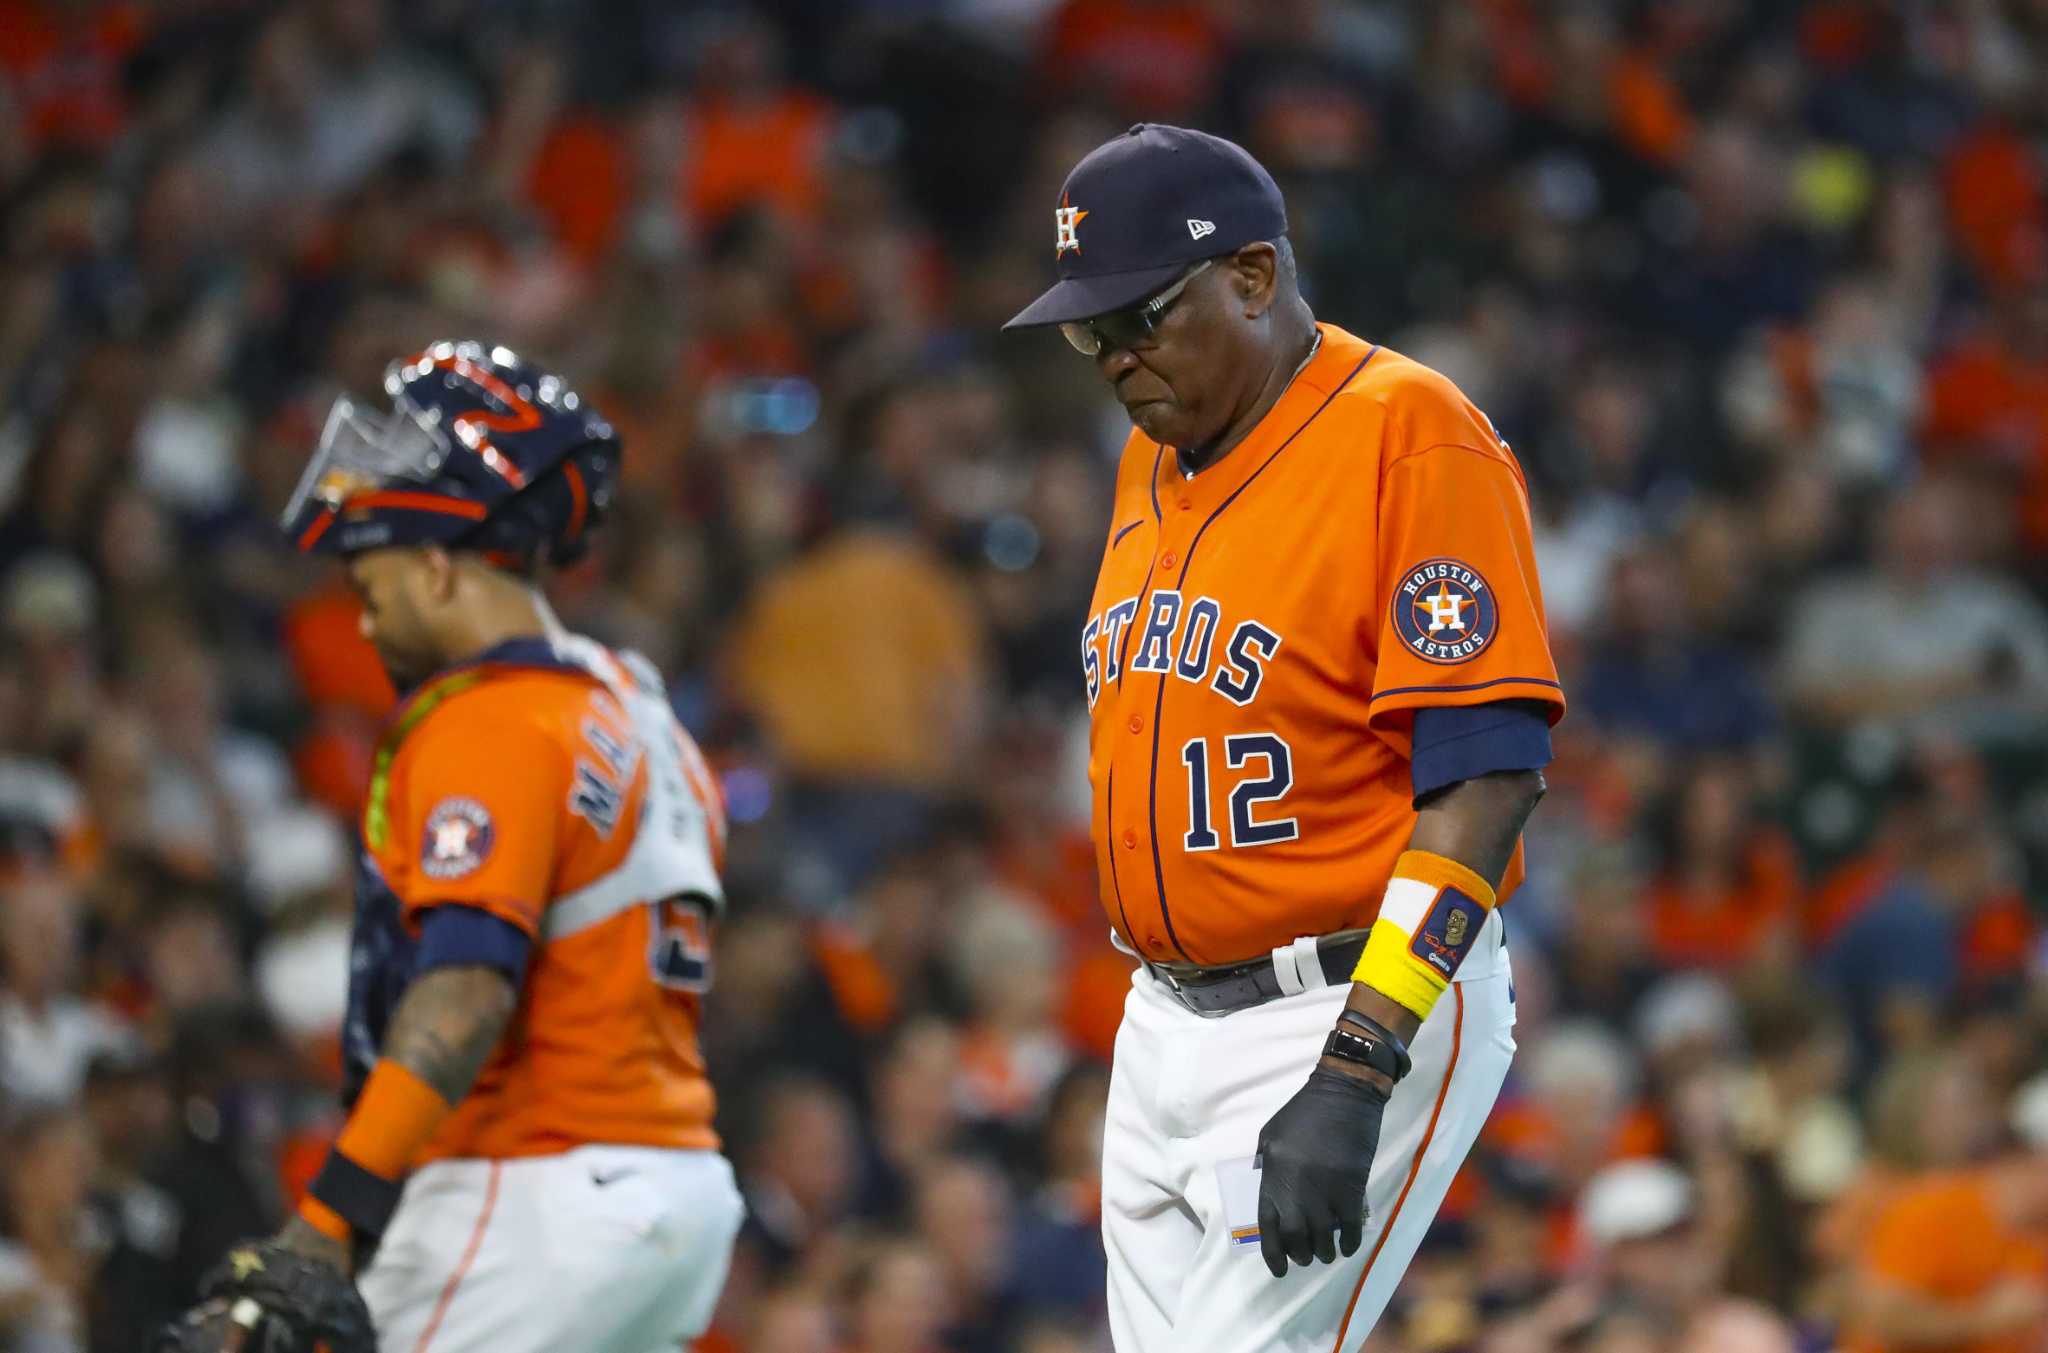 Astros manager Dusty Baker erases doubt. He's a World Series champ.